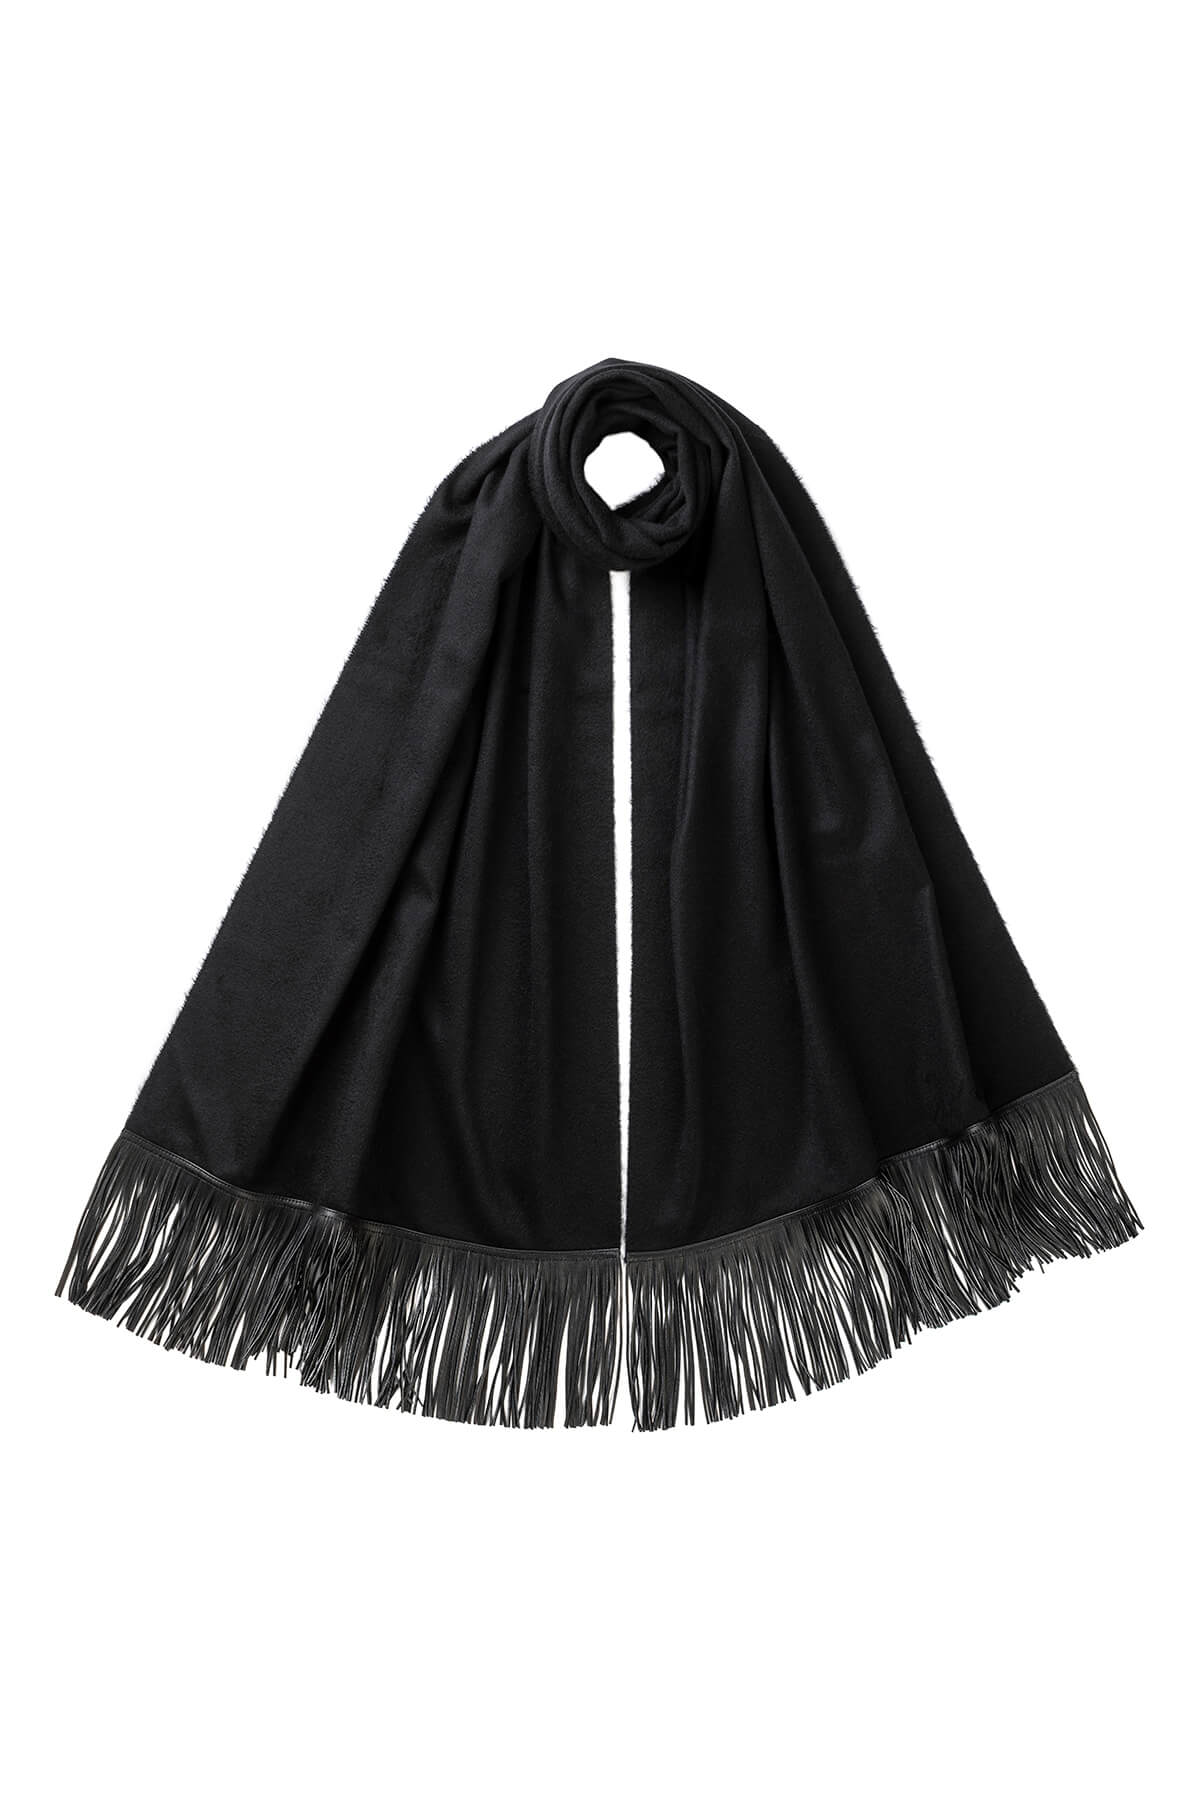 Johnstons of Elgin Black Cashmere Stole with Leather Fringe on a white background TA000448SA0900ONE